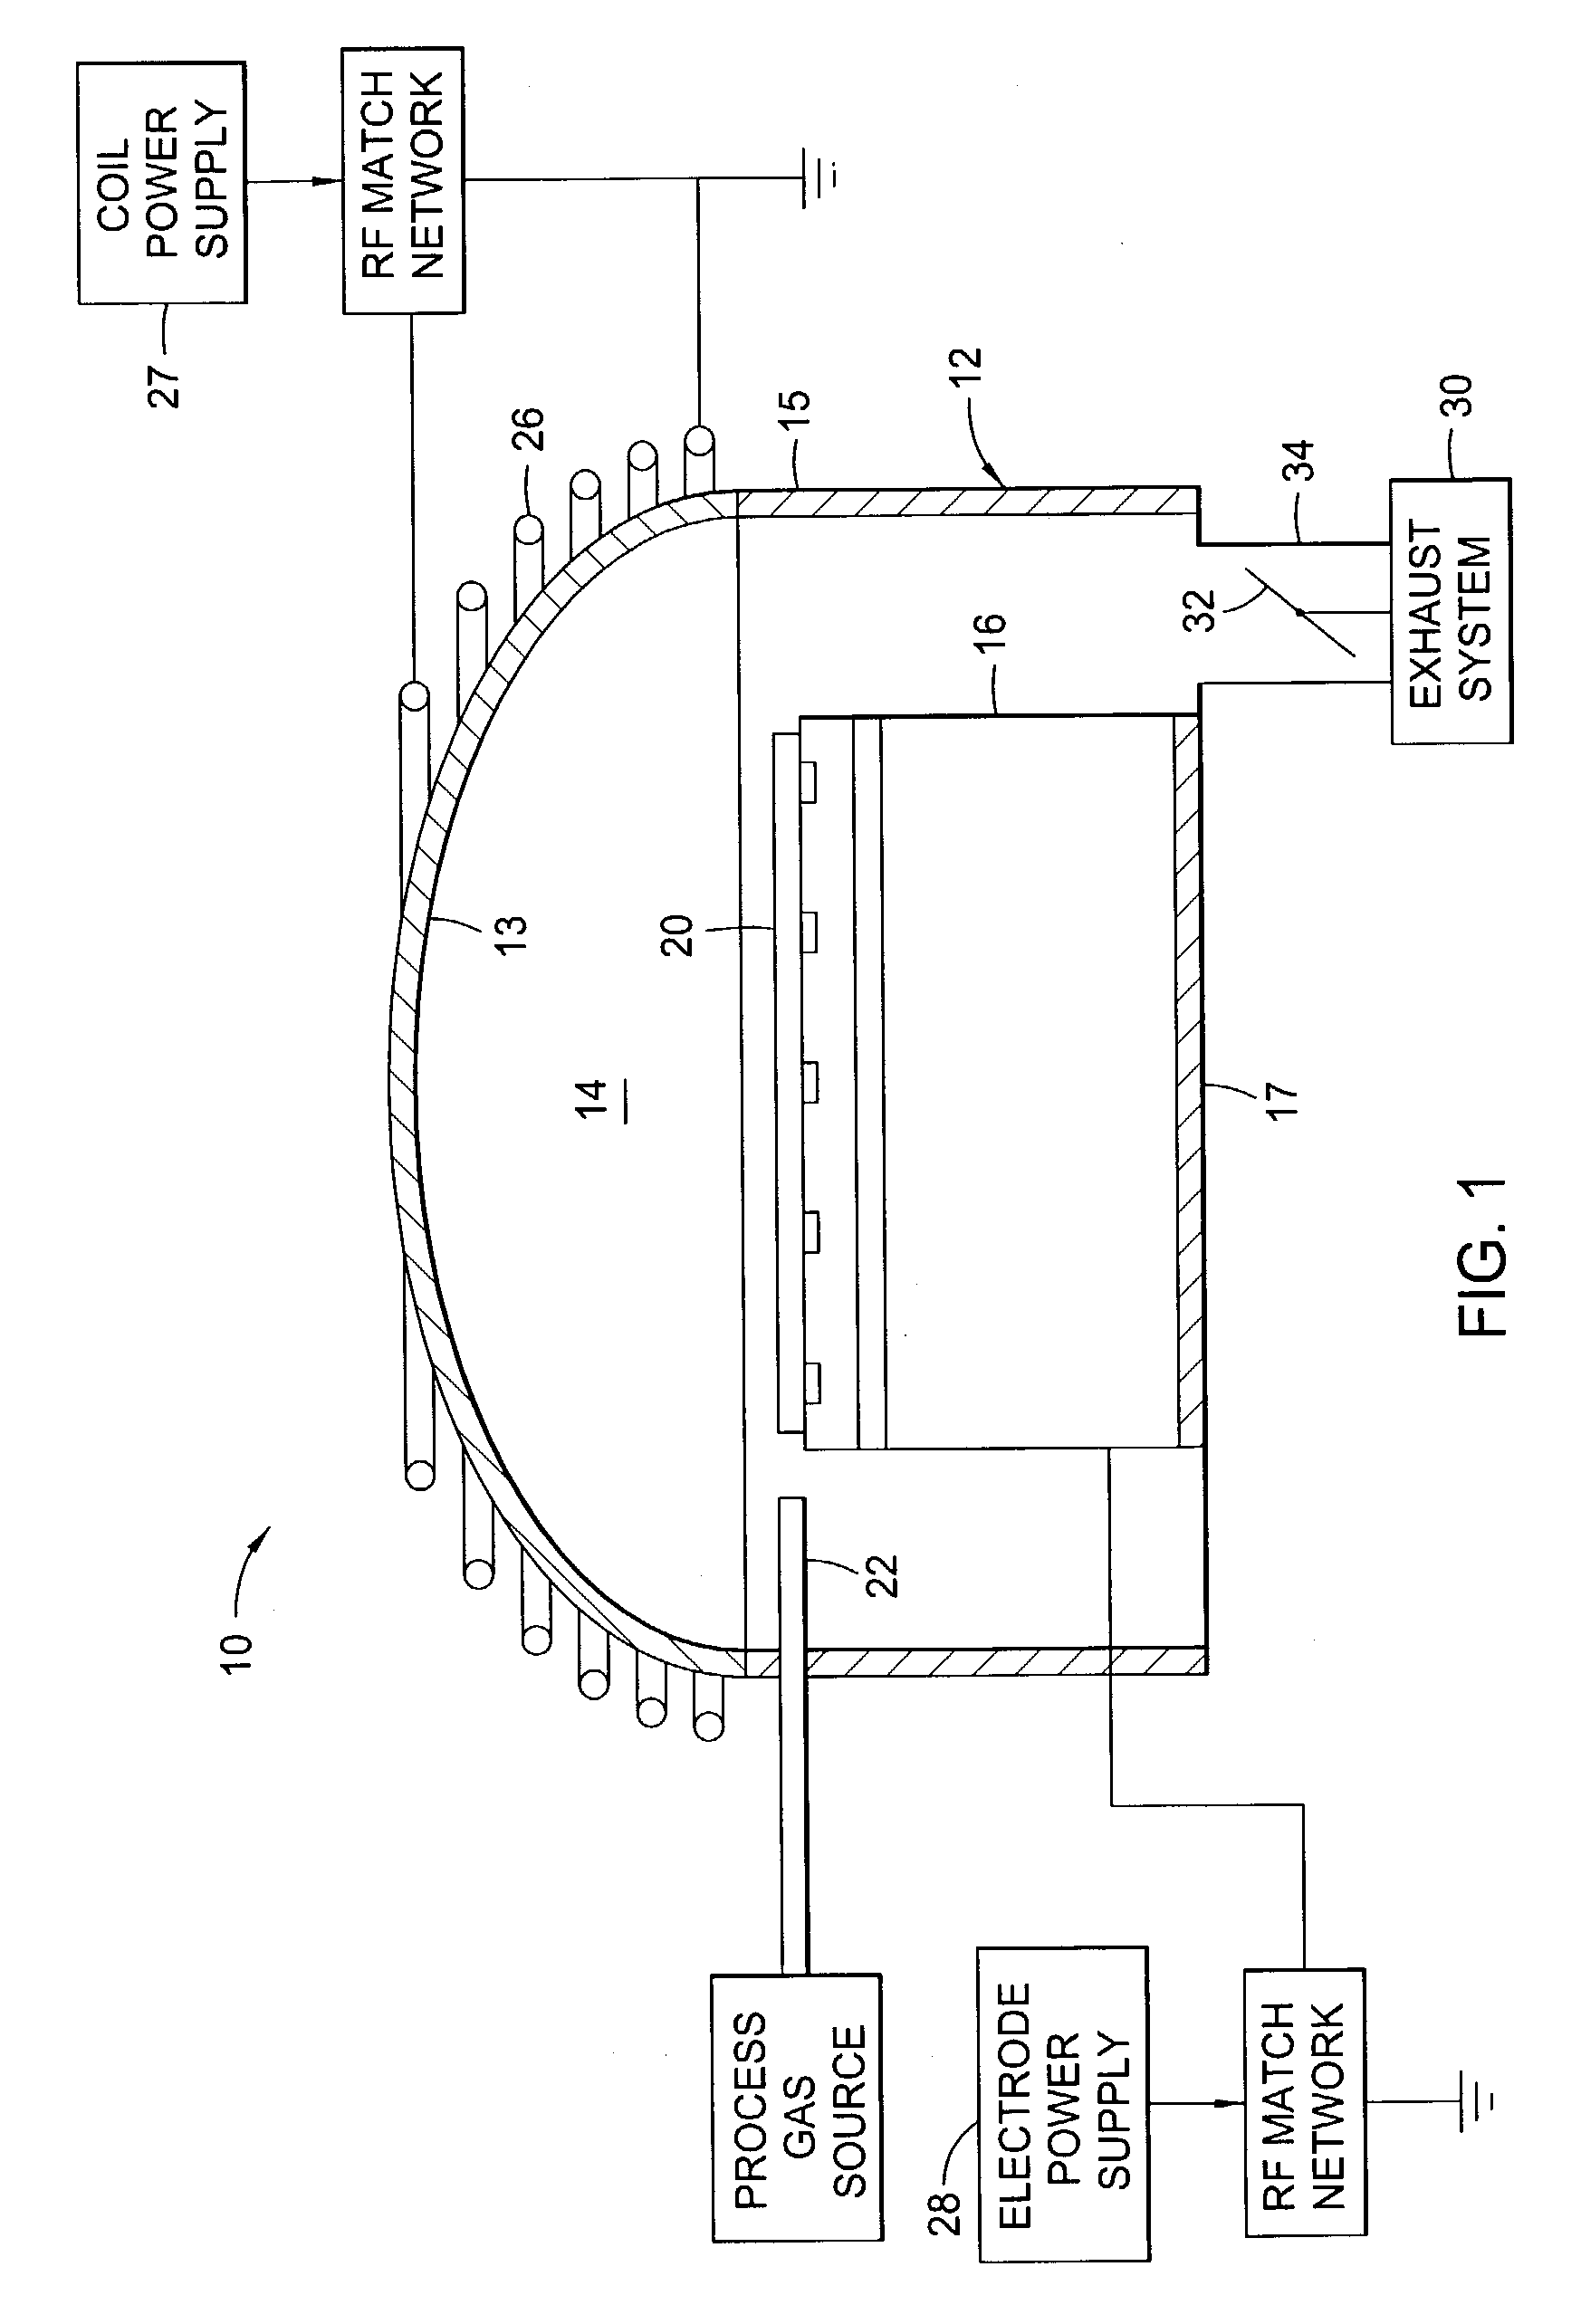 Methods for substrate orientation